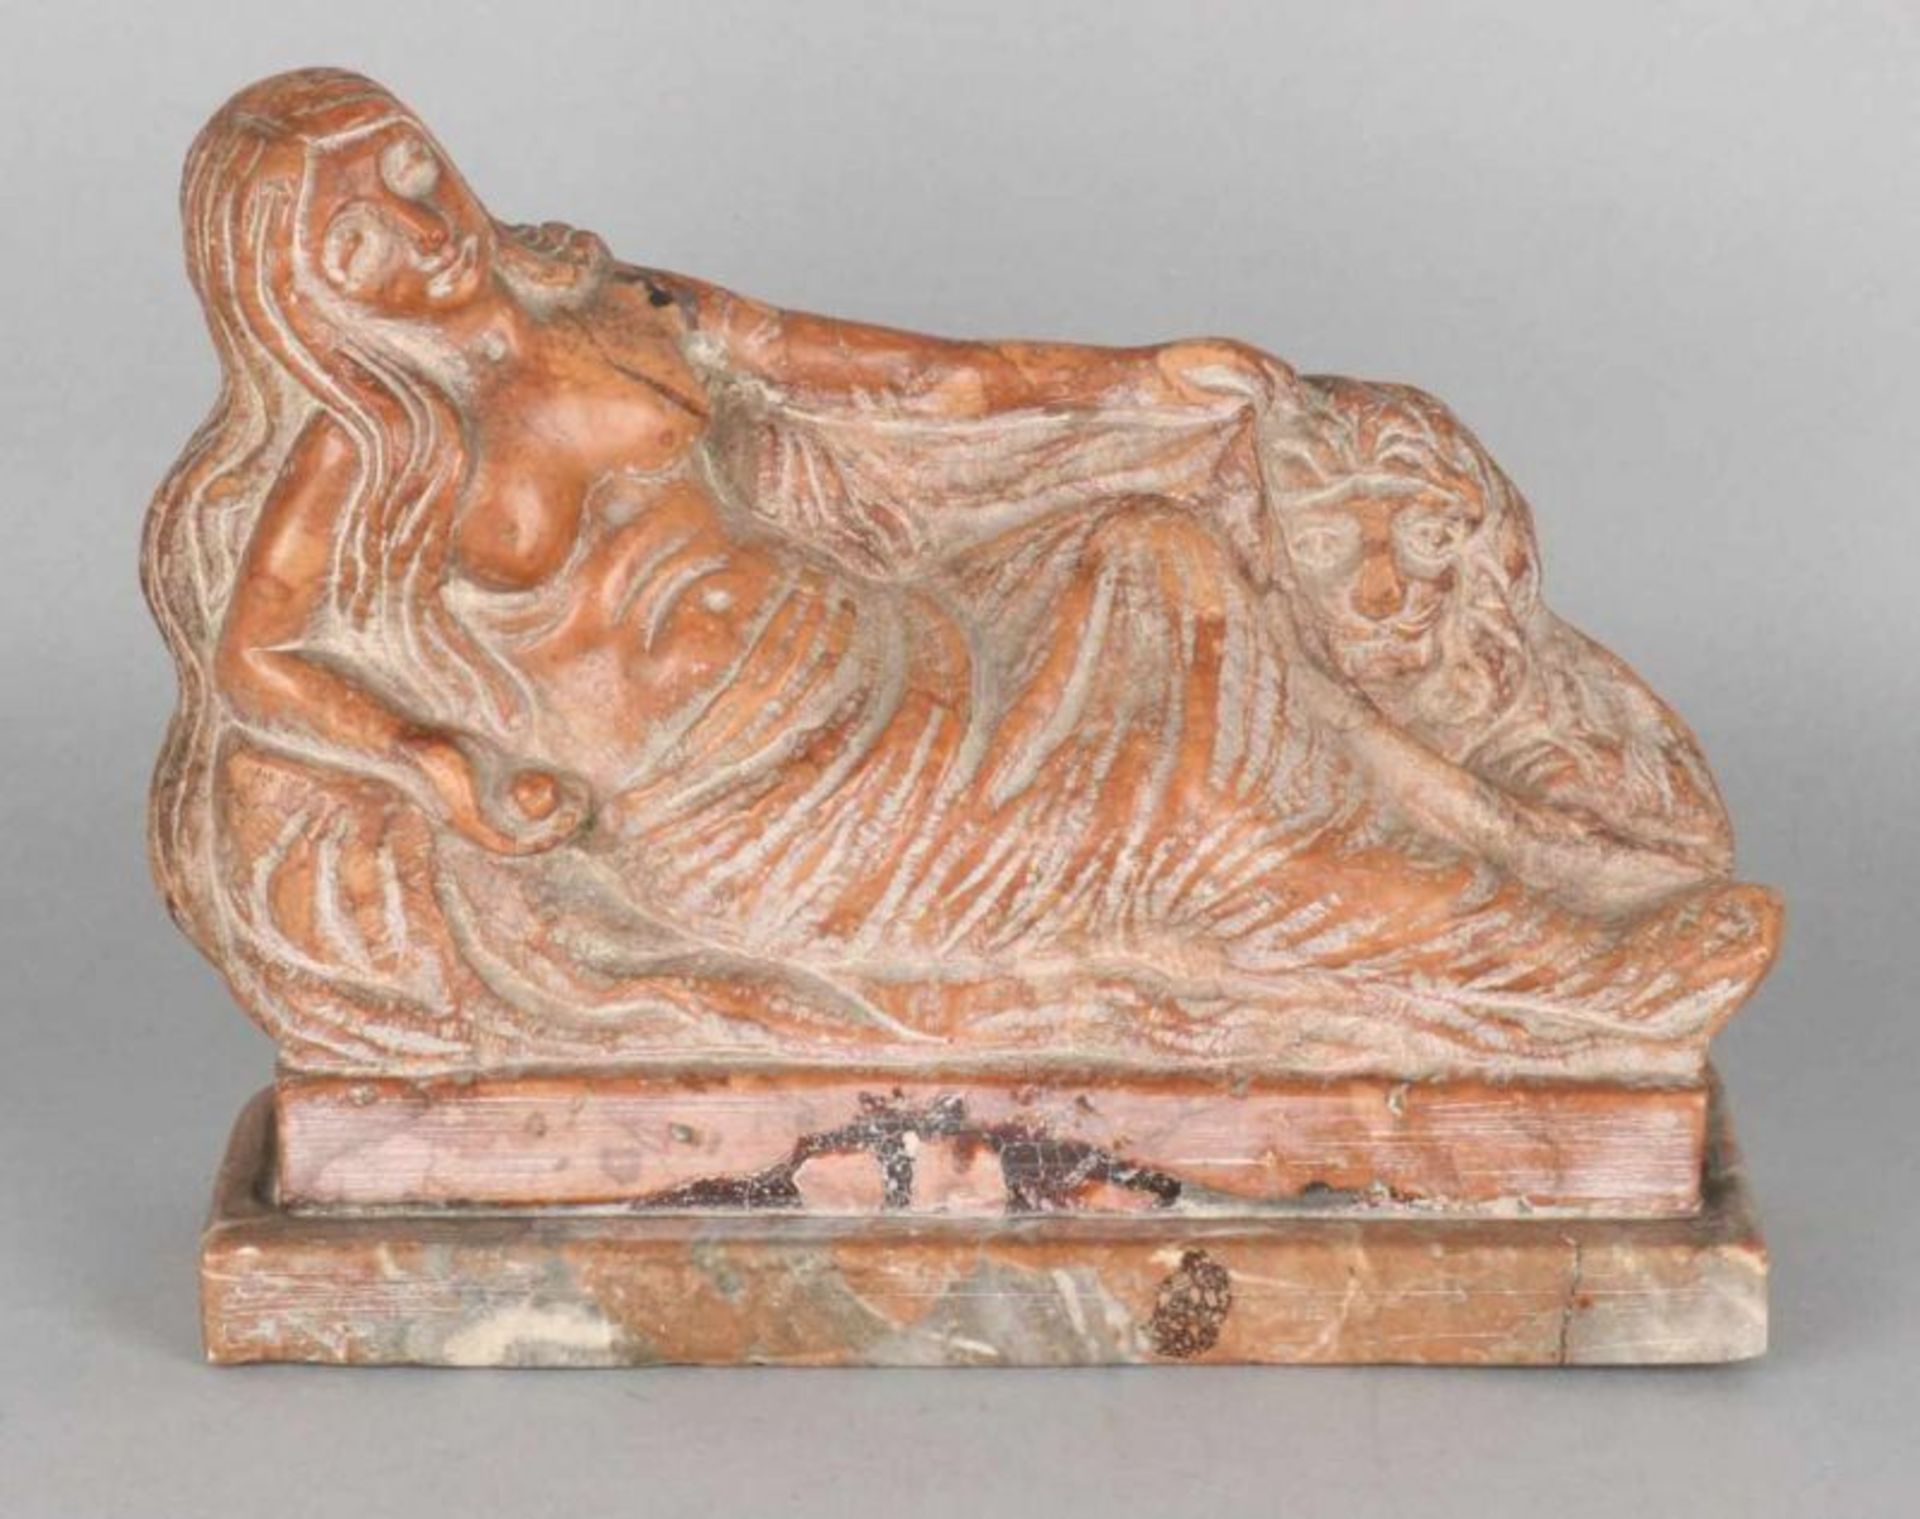 Antique baroque marble statue. Lying woman with lion. Probably Italy. 18th century. Size: 19 x 23